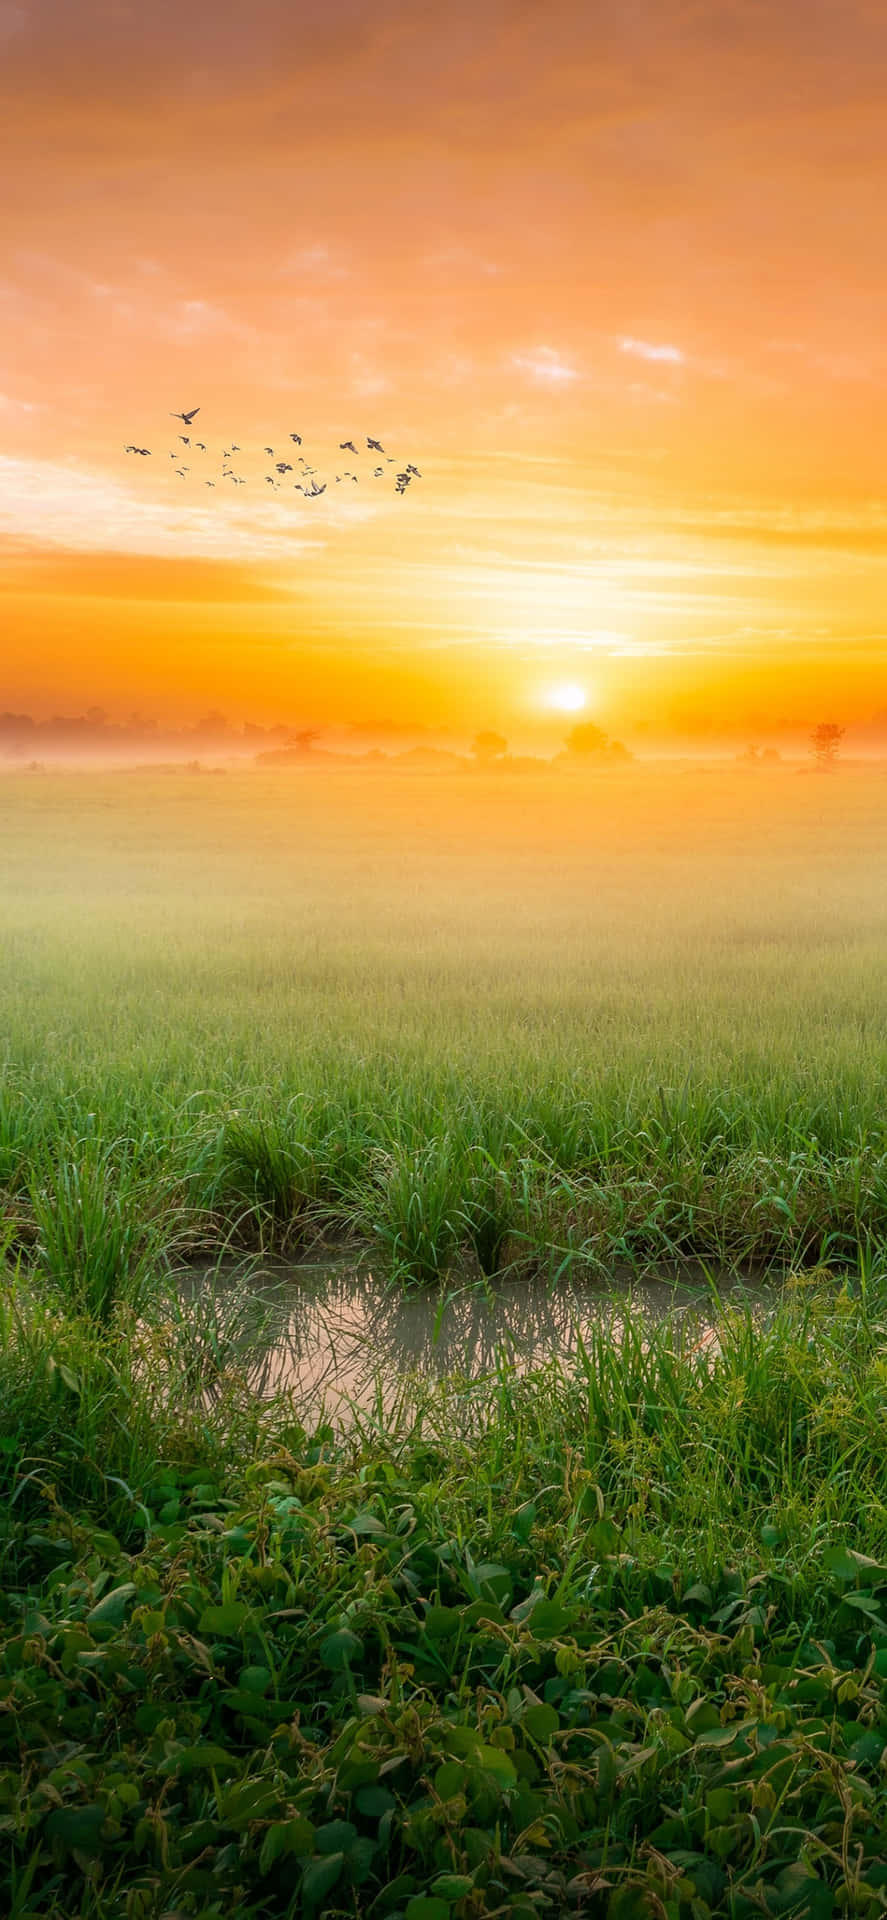 Free Sunrise Wallpaper Downloads, [400+] Sunrise Wallpapers for FREE |  